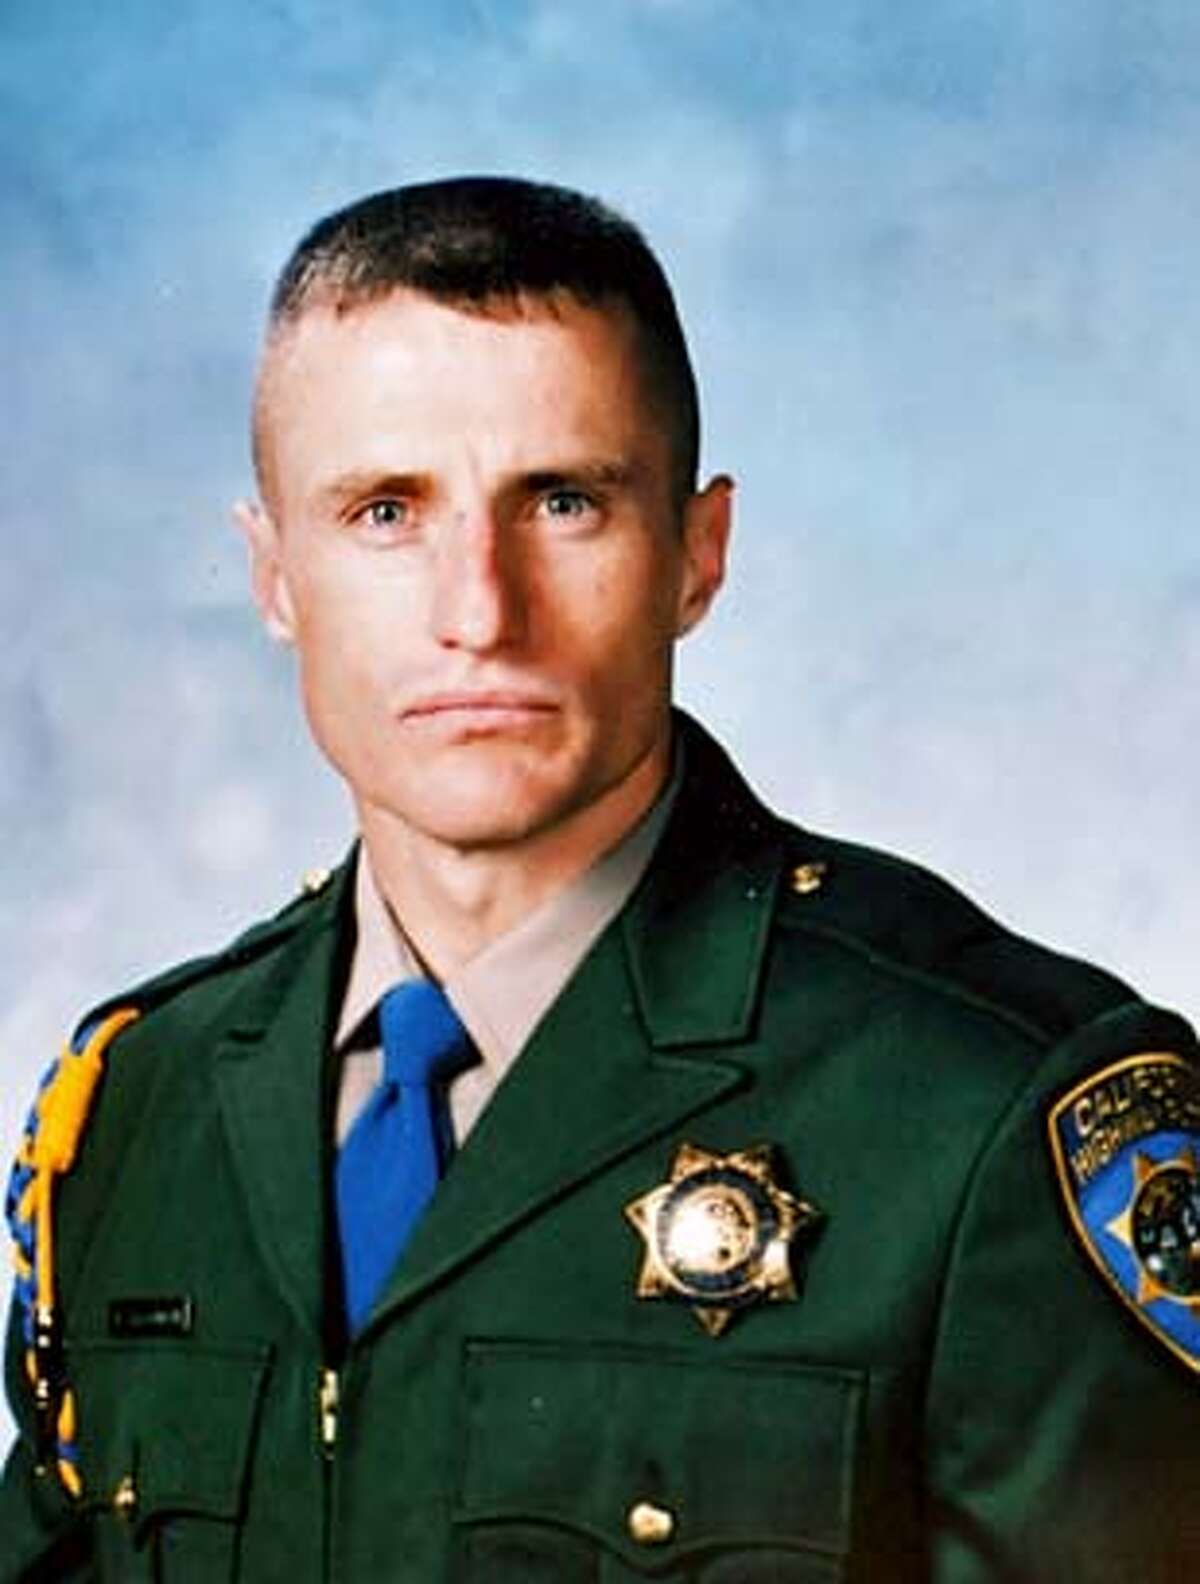 CLEARMAN_013_CAG.JPG California Highway Patrol Officer, Brent Clearman was struck by a hit-and-run vehicle as he was investigating a vehicle accident on the 880 freeway at the 66th Avenue off ramp on Saturday, August 5, 2006. Clearman, a two-year veteran of the CHP, later died from his injuries. Photo by Carlos Avila Gonzalez/The San Francisco Chronicle Photo taken on 8/6/06, in San Francisco, Ca, USA **All names cq (source) MANDATORY CREDIT FOR PHOTOG AND SAN FRANCISCO CHRONICLE/ -MAGS OUT